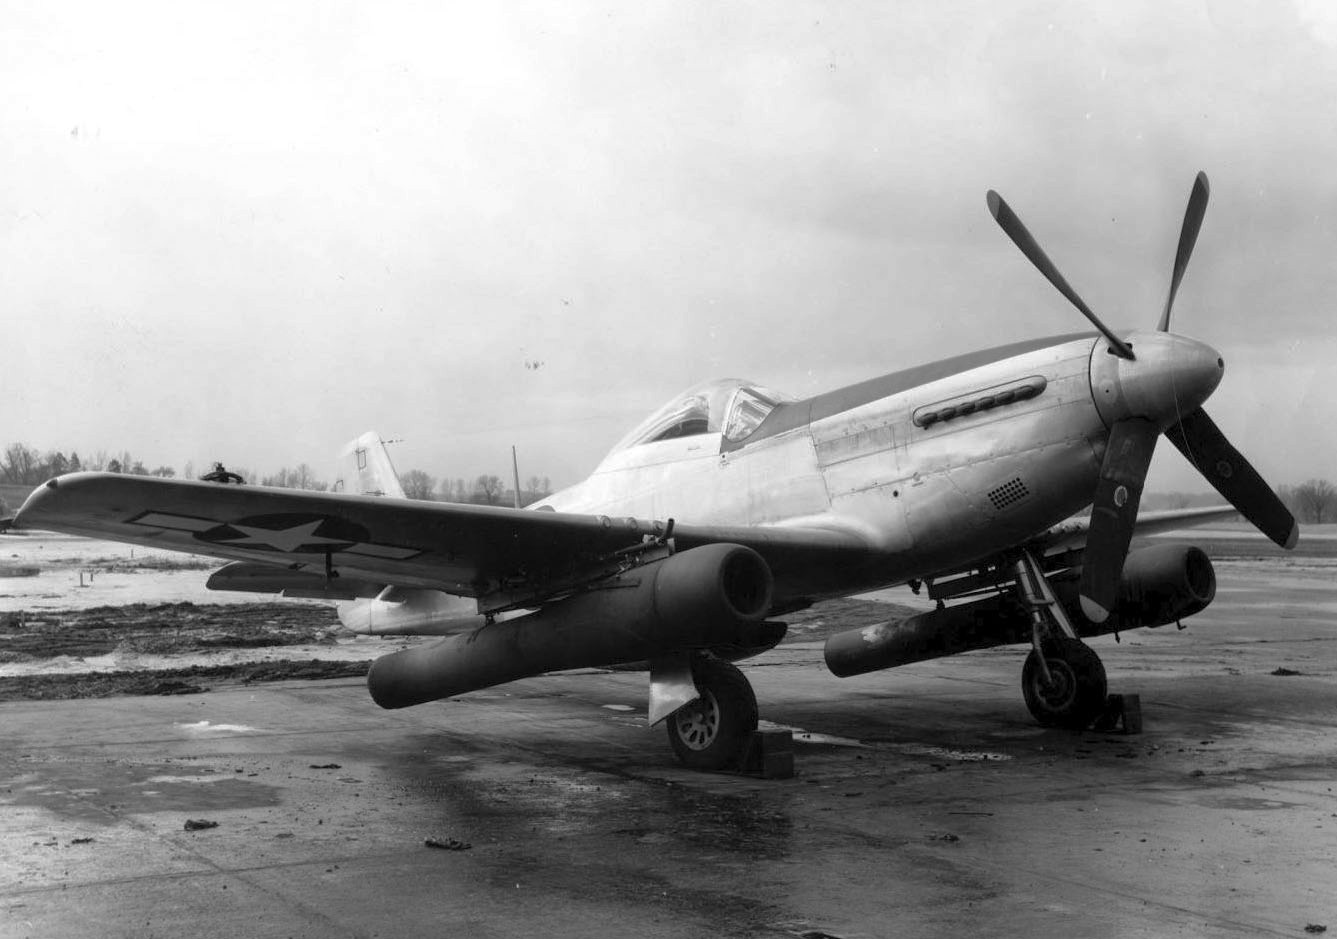 An Experimental P-51 Mustang with Underwing Pulsejets